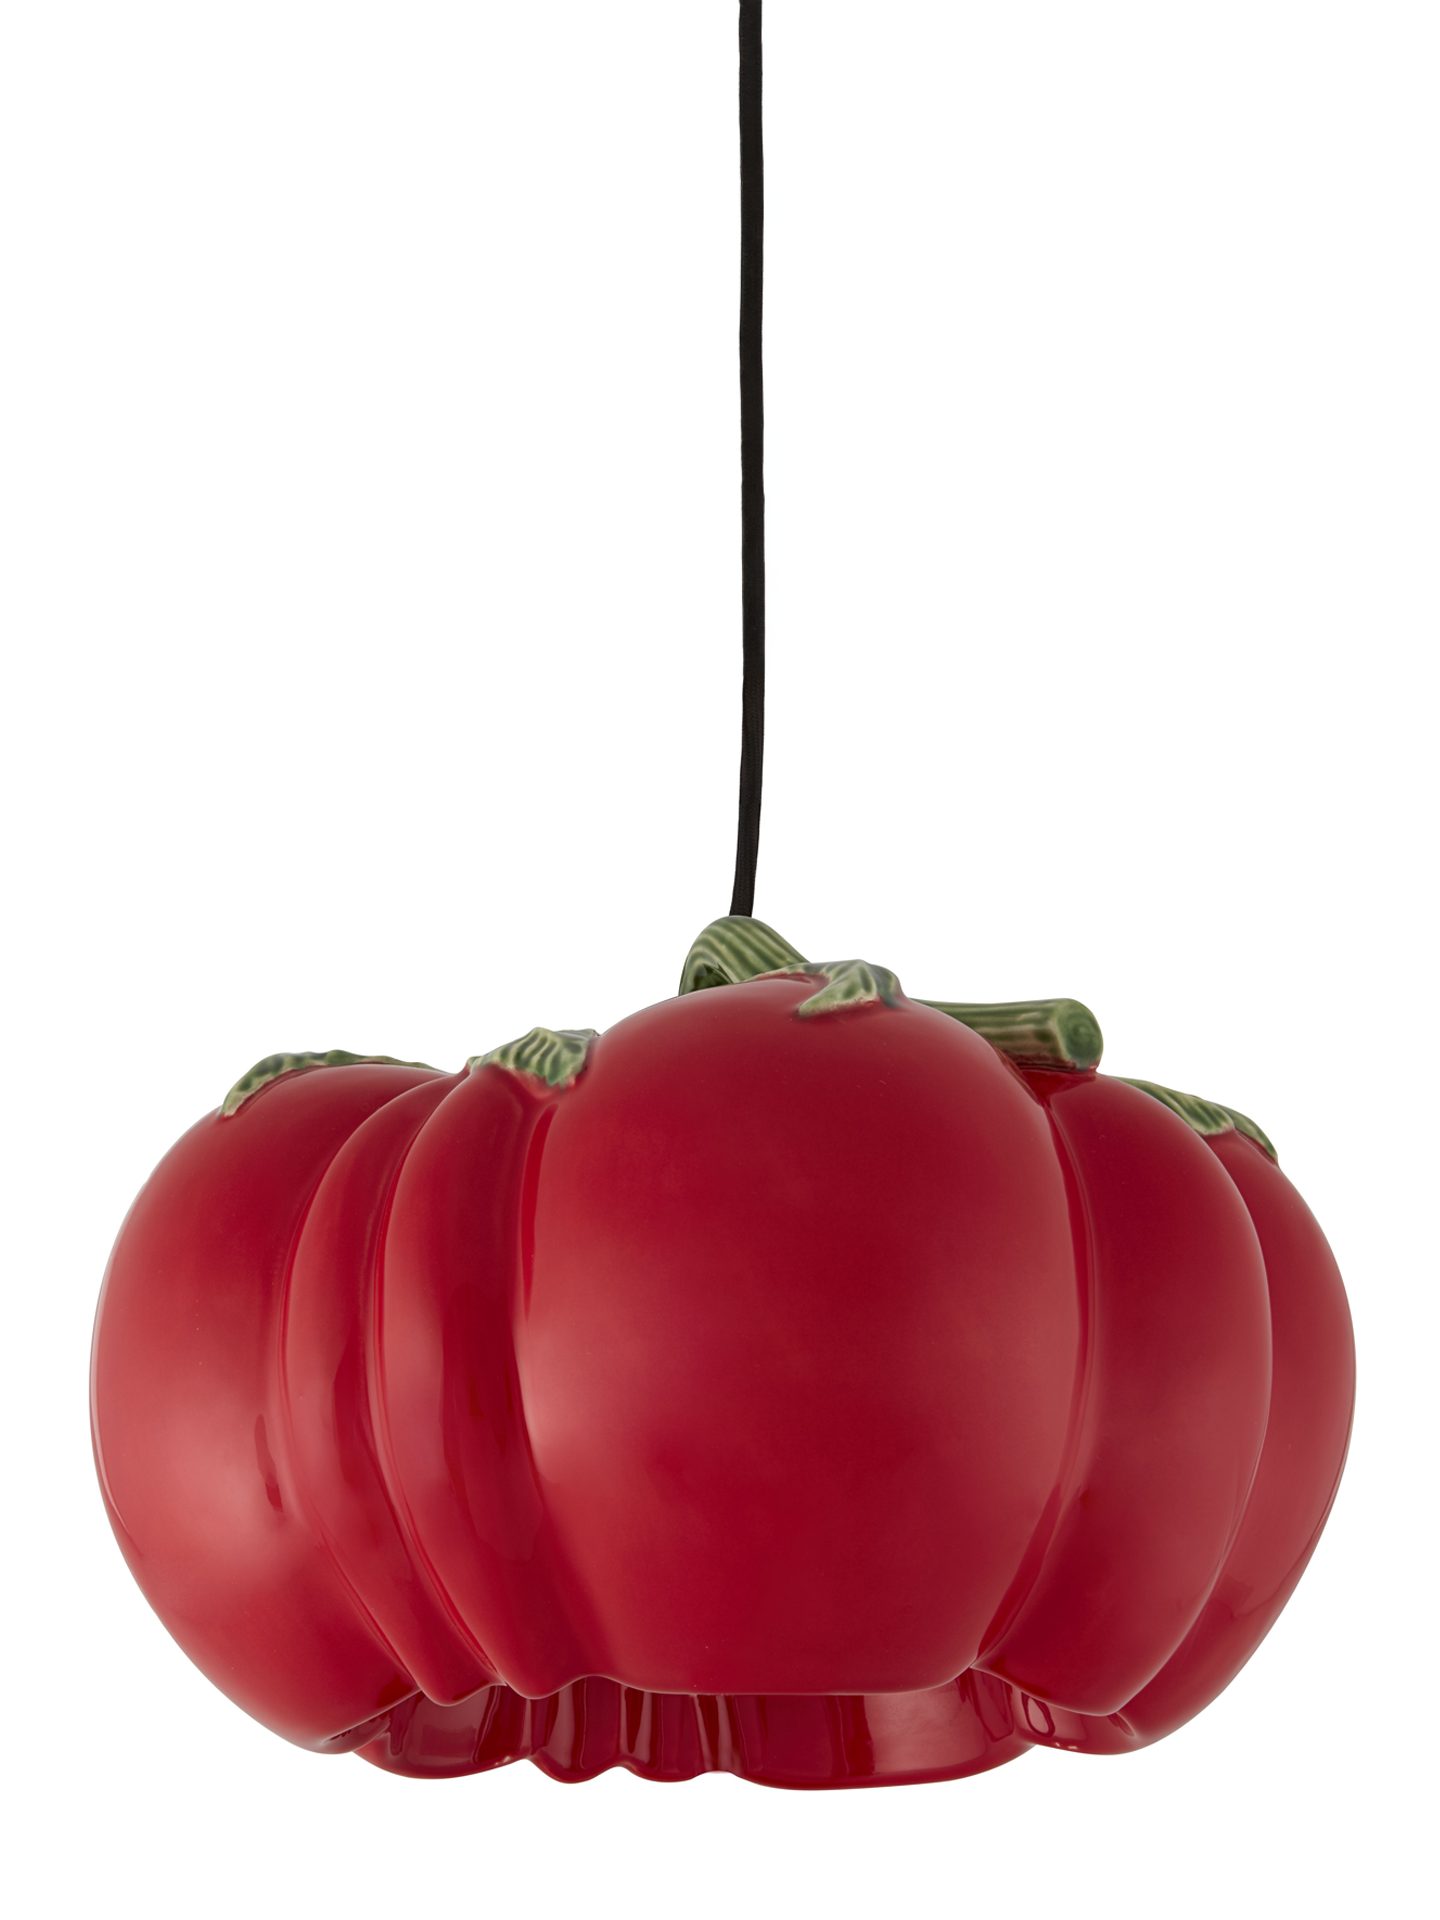 Tomato Chandelier, red